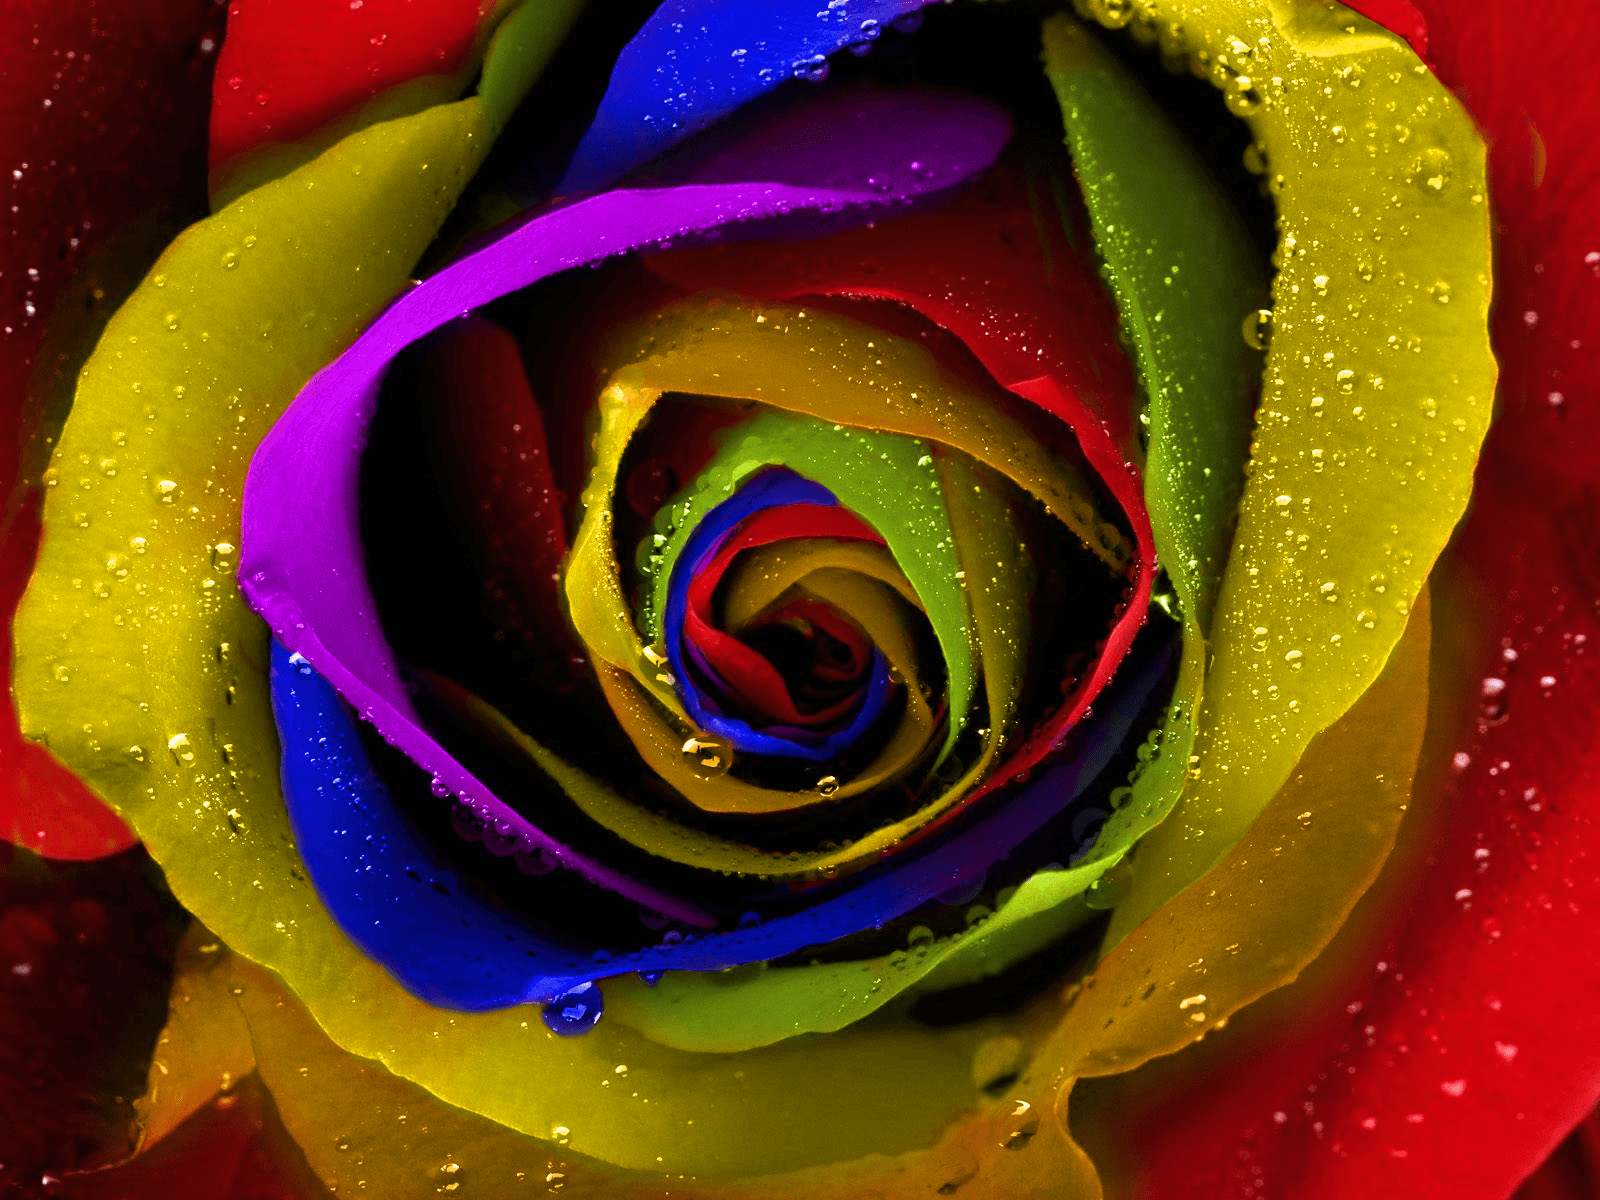 Rainbow Roses, High Definition, High Quality, Widescreen